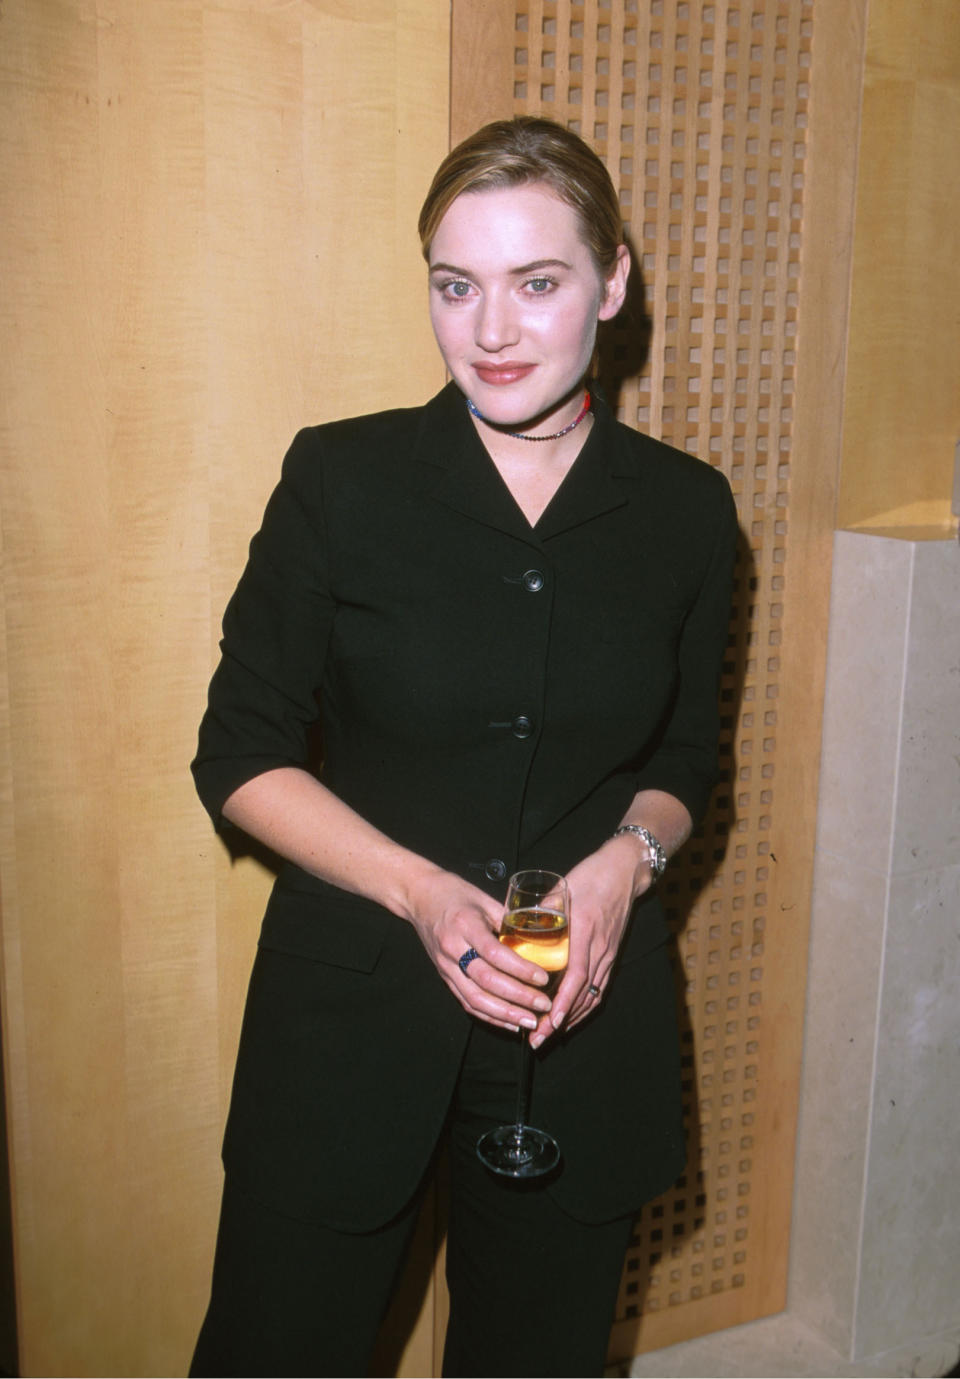 Woman in a black suit holding a glass at an event